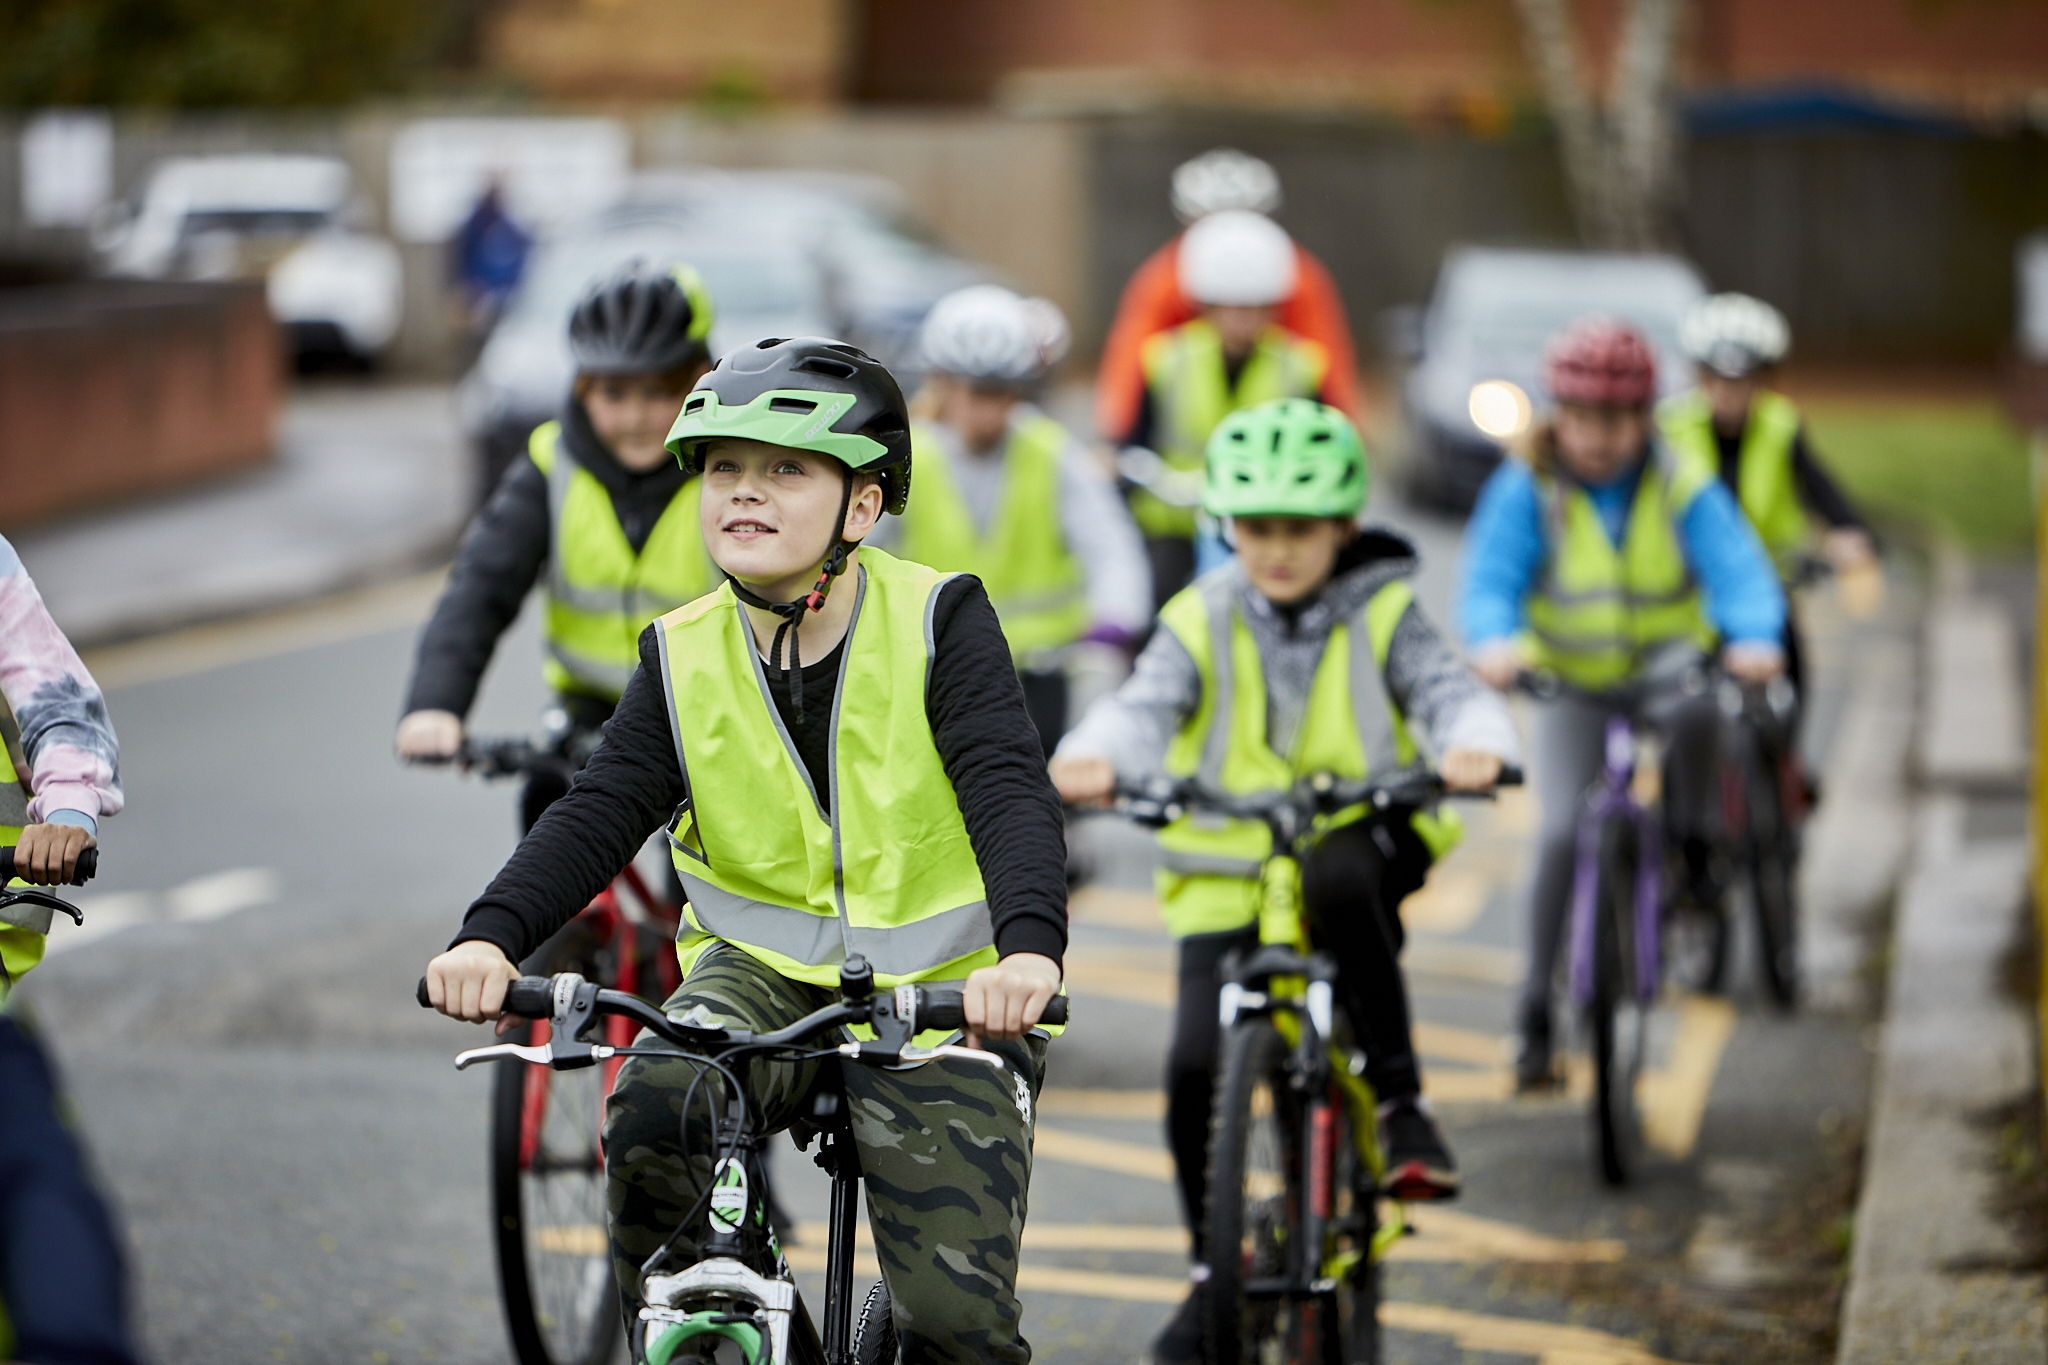 A group of Bikeability riders having a lesson on the road